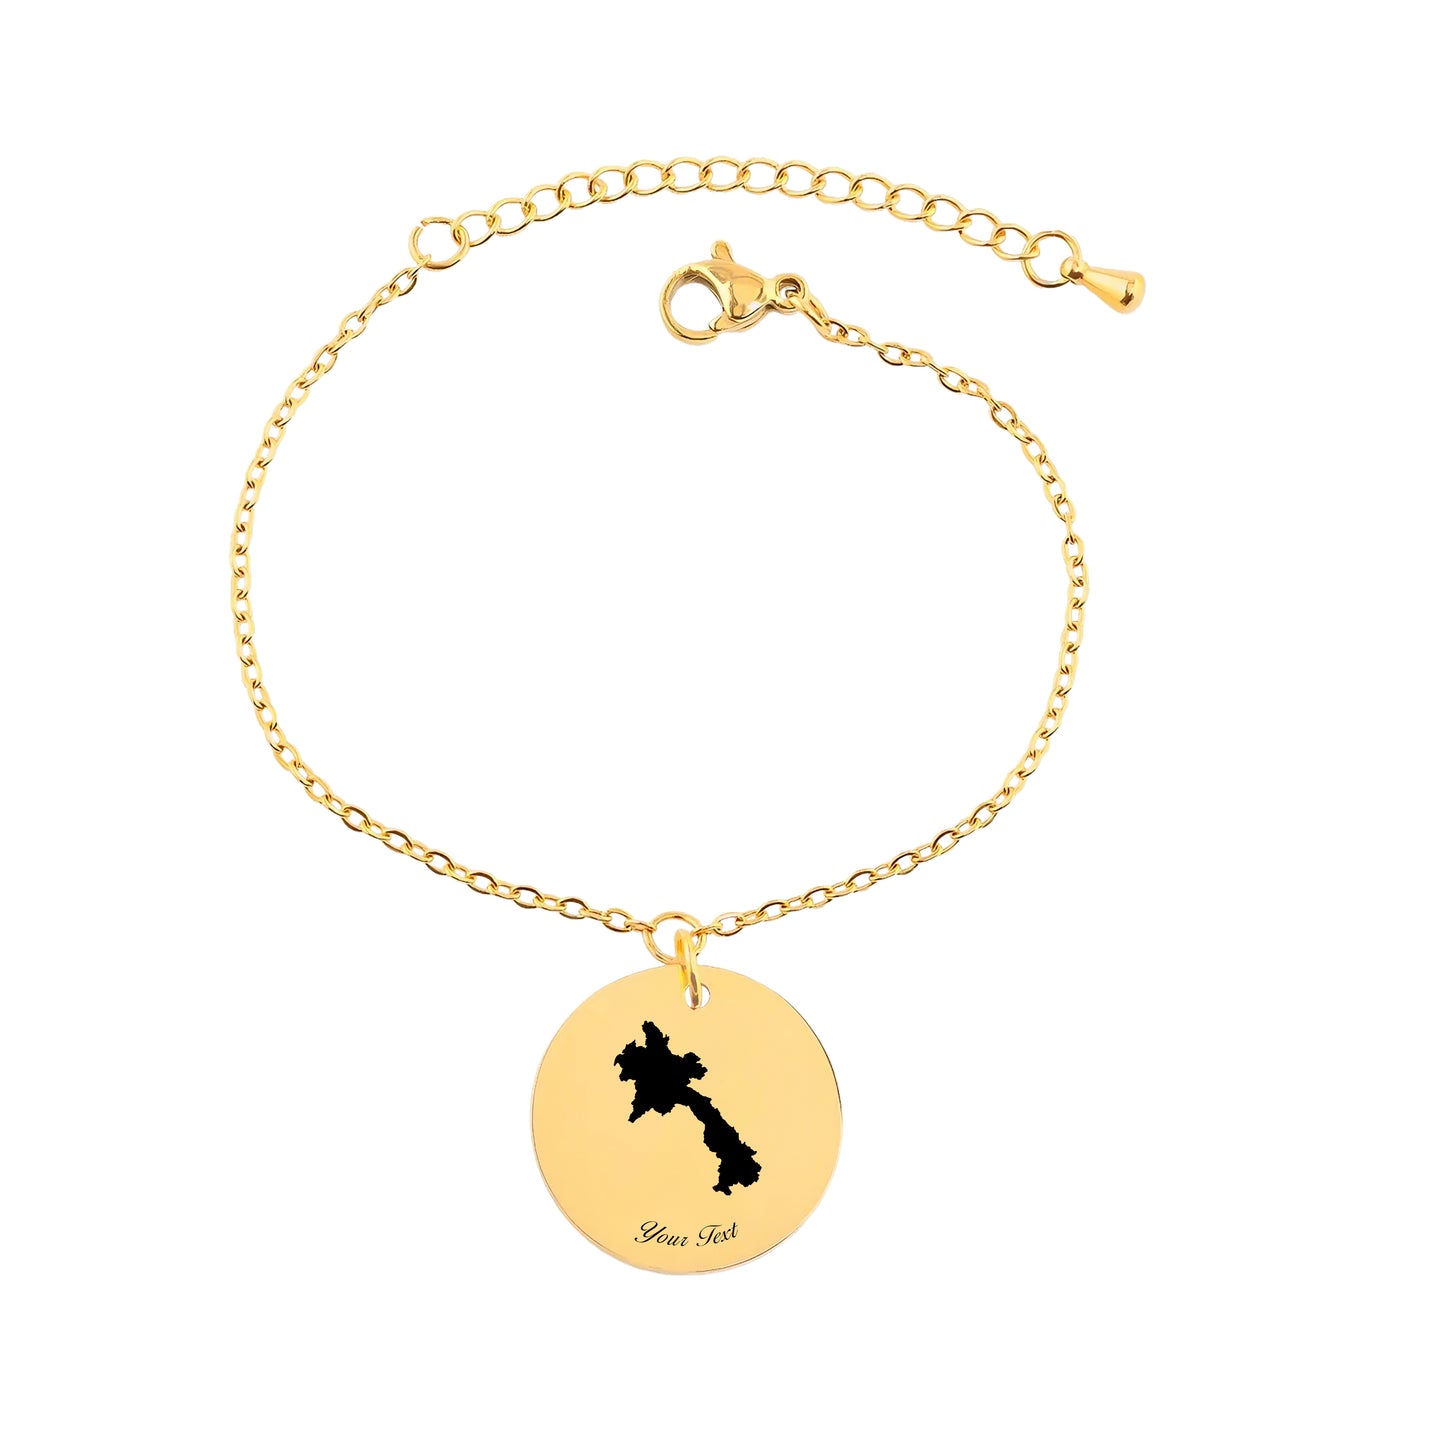 Laos Country Map Necklace - Personalizable Jewelry